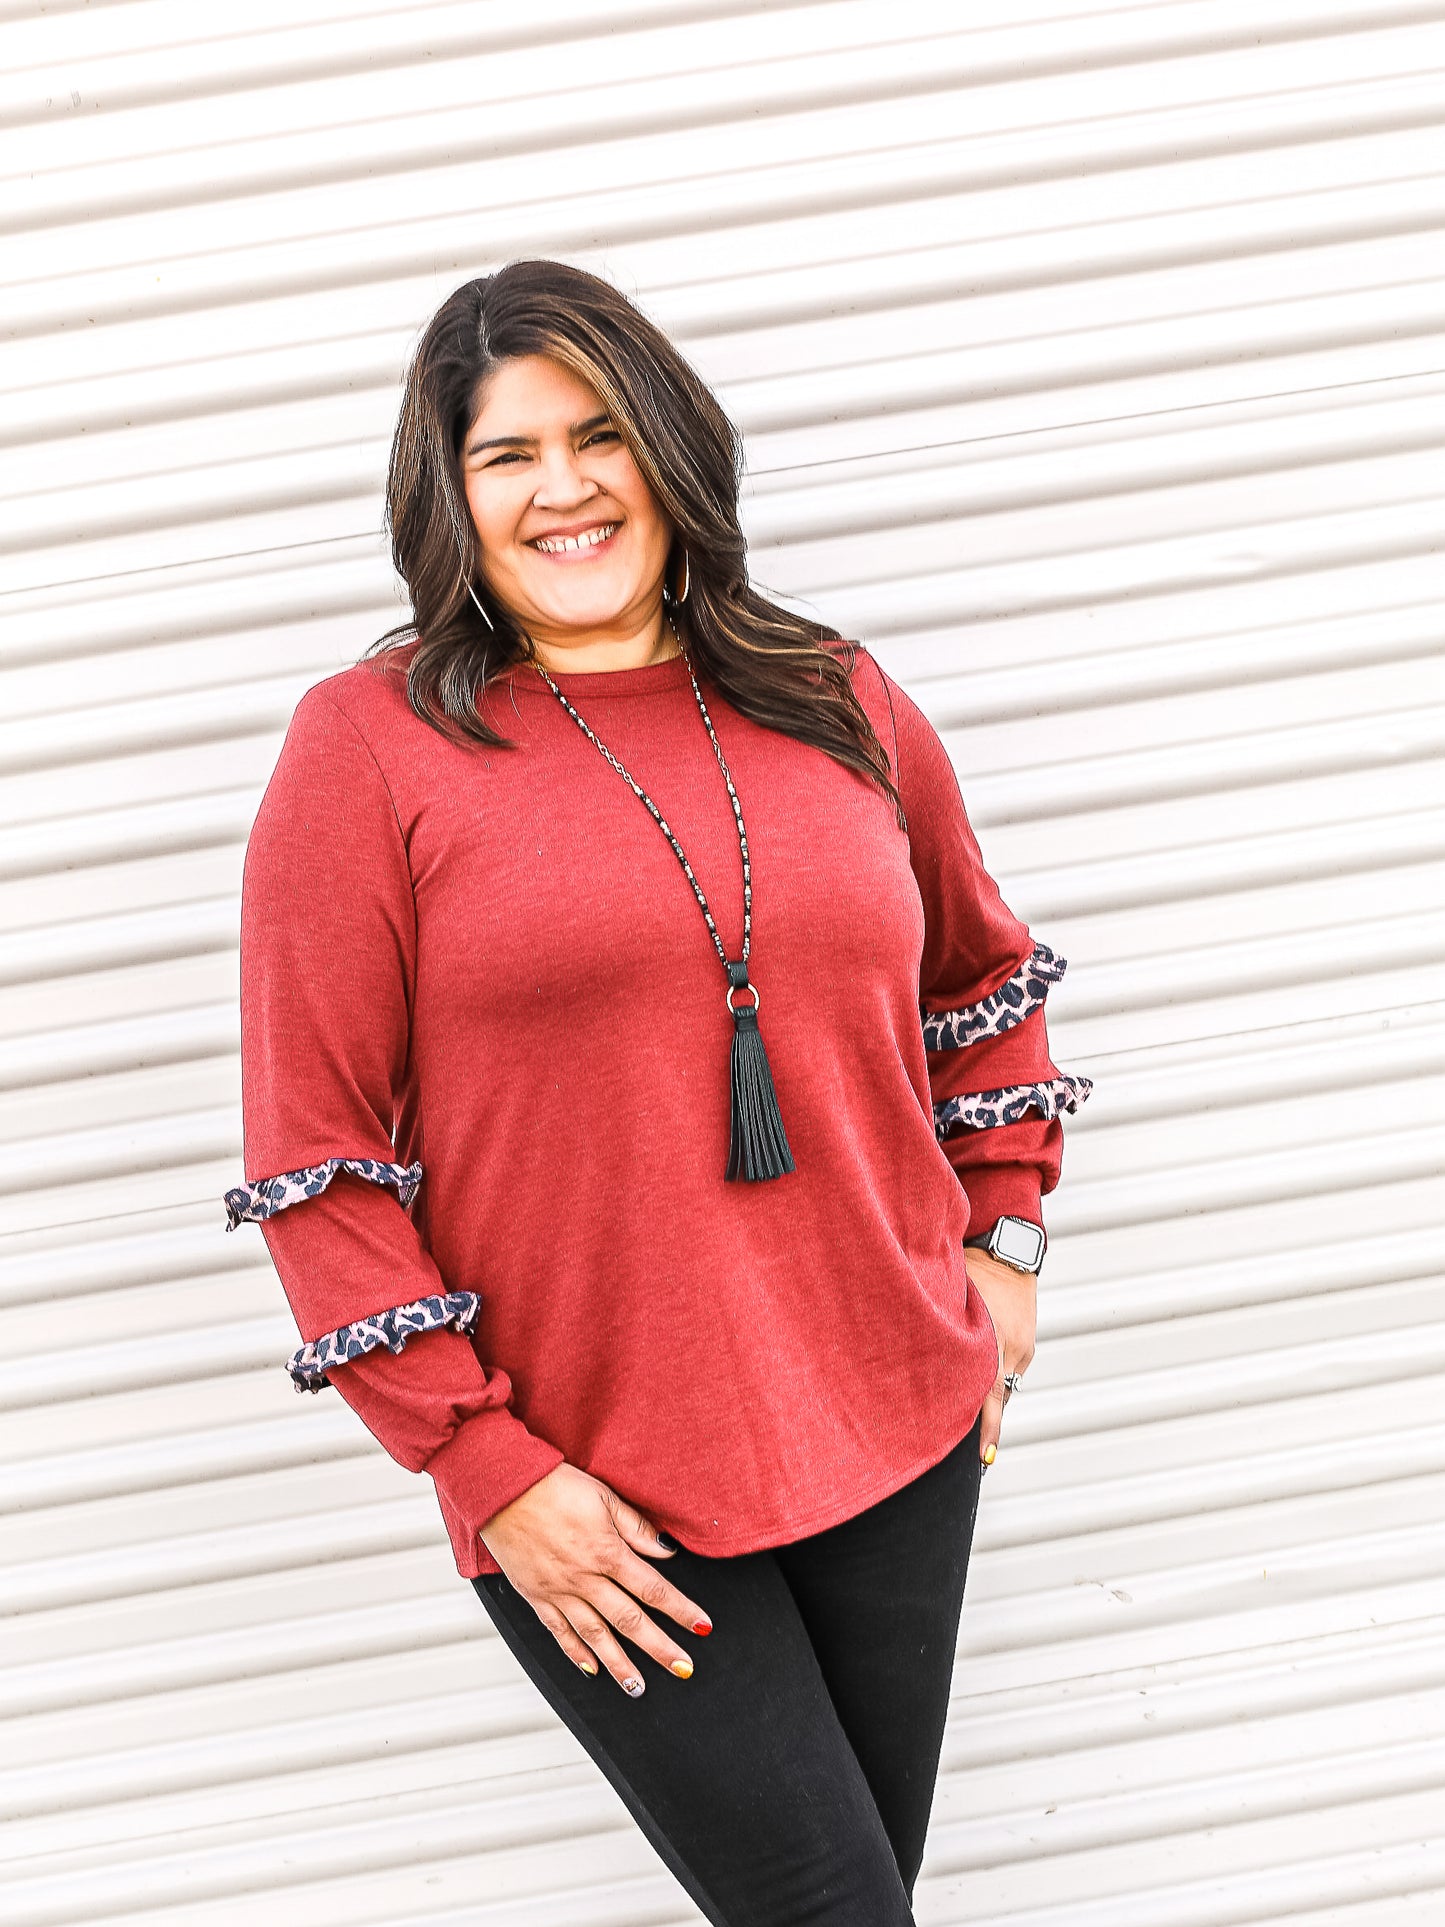 Red long sleeve top with leopard ruffled details on the lover sleeves.